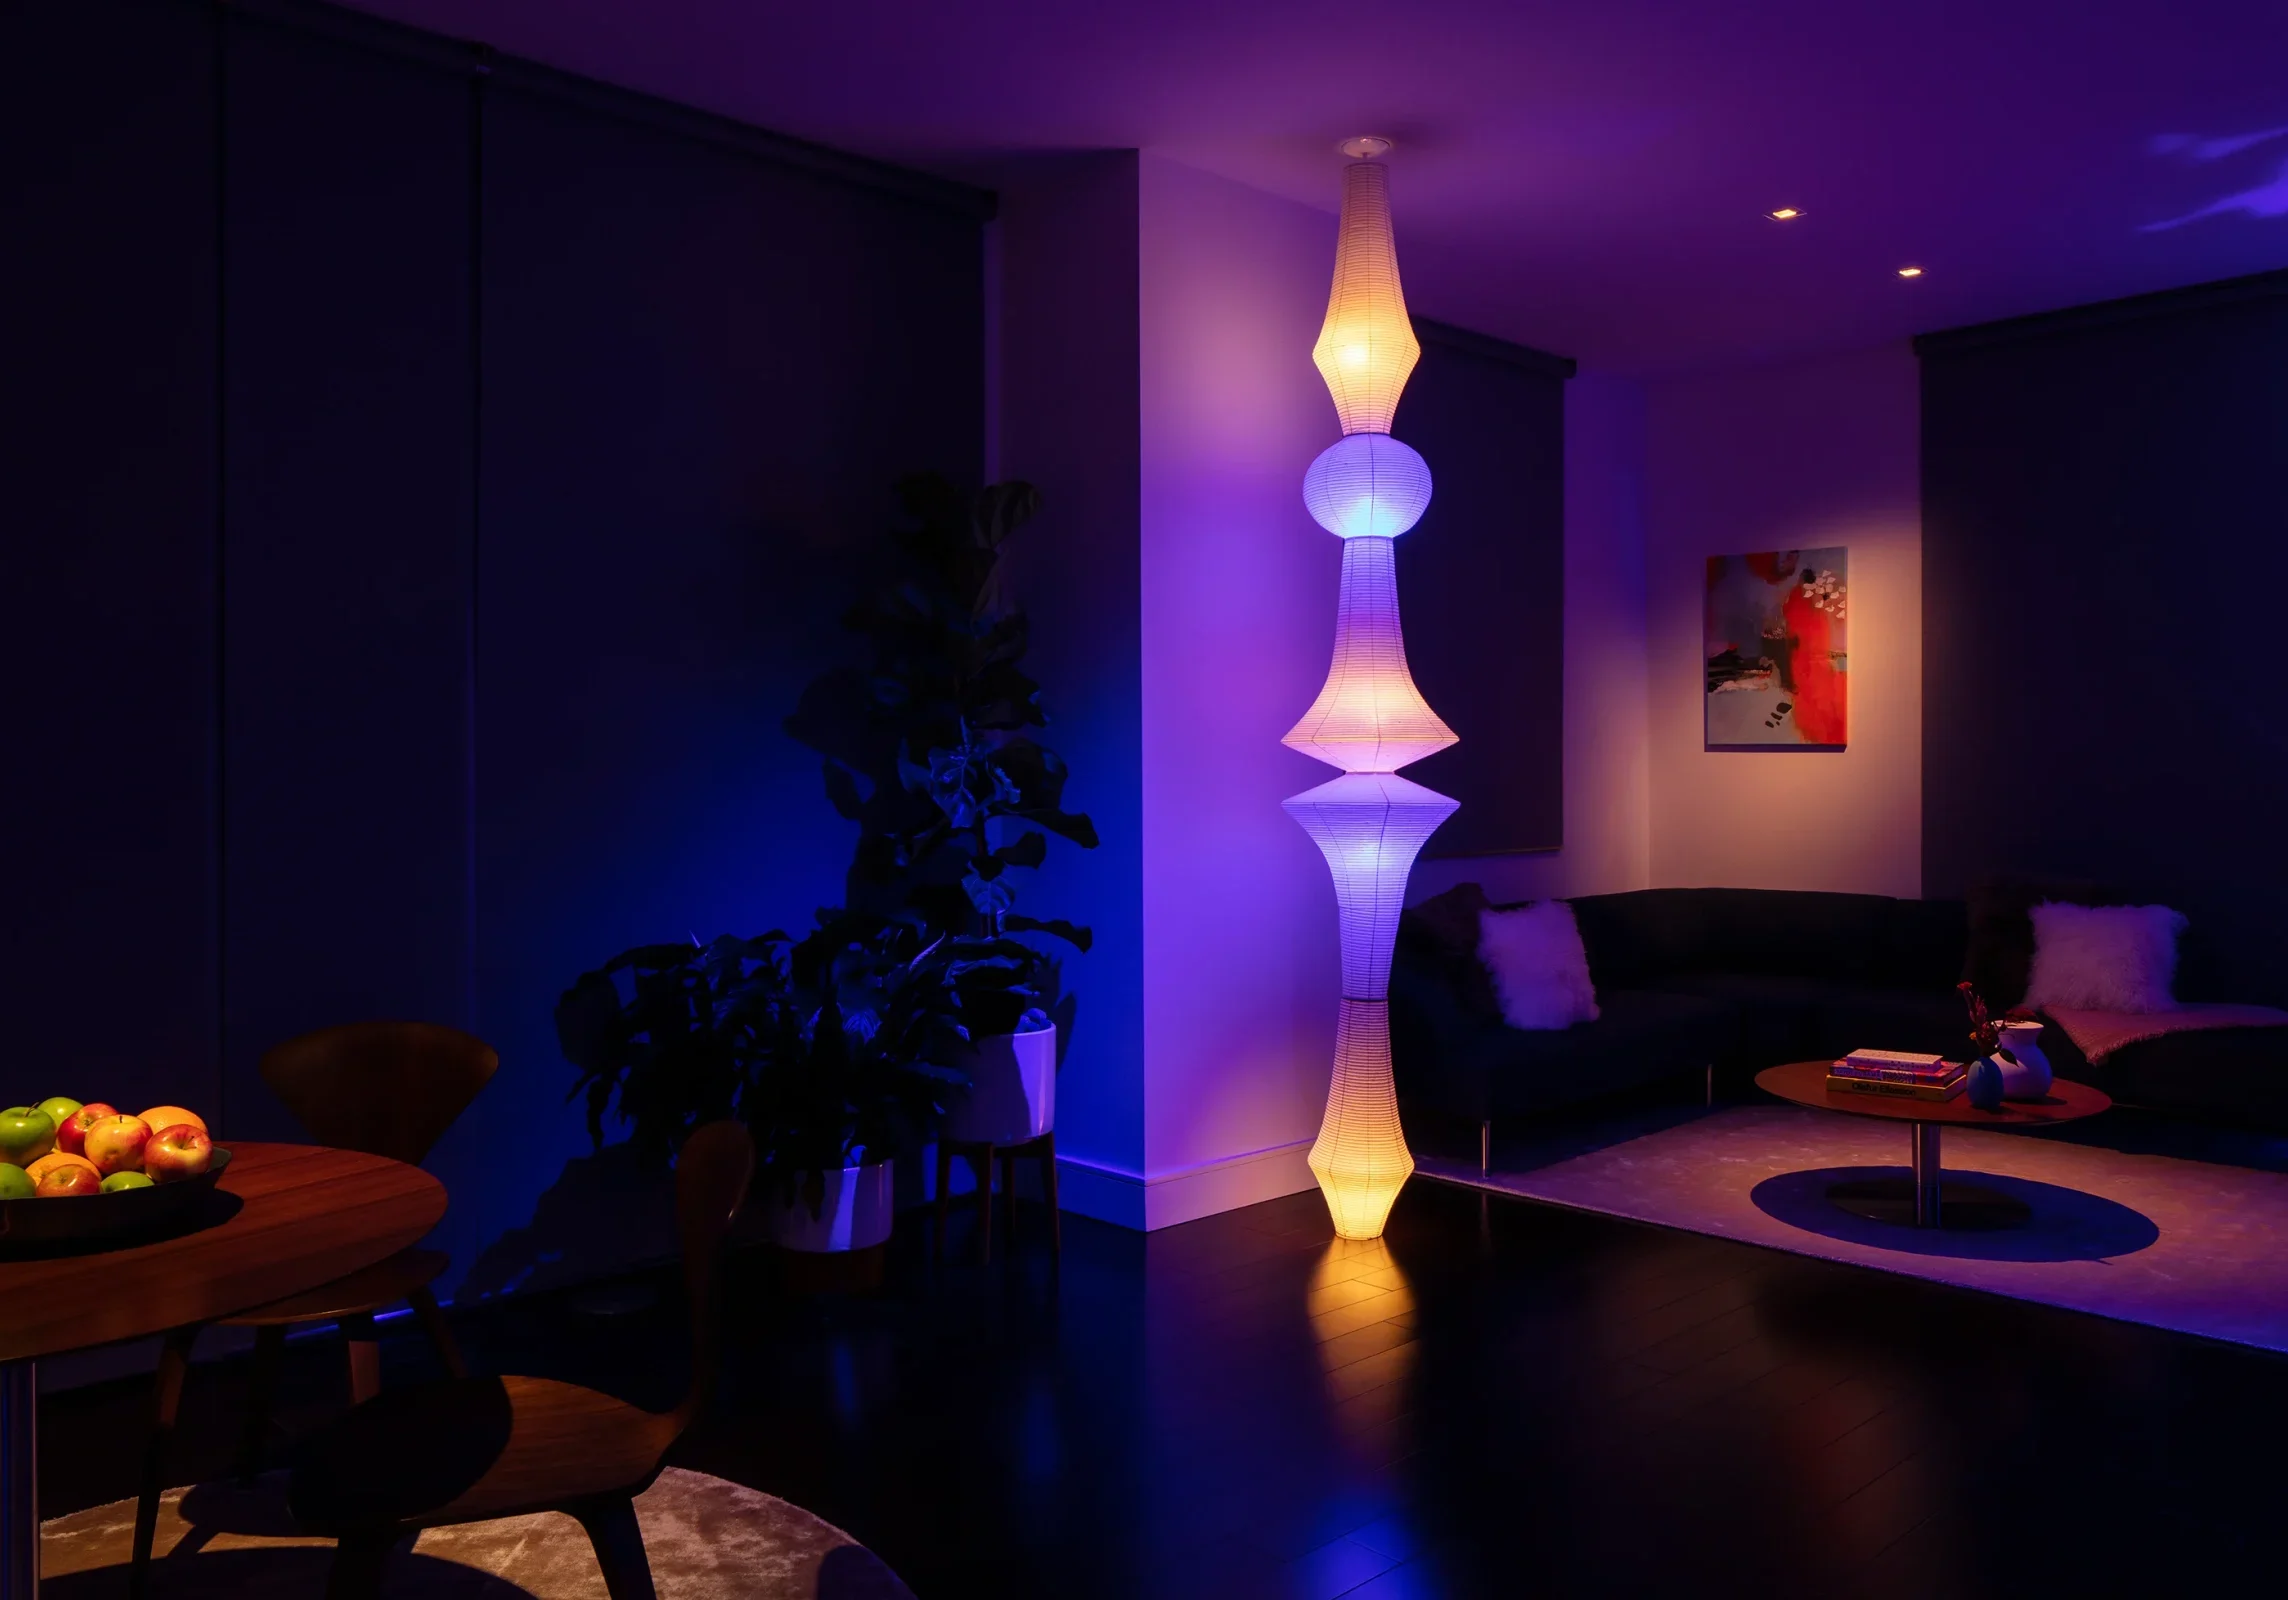 Intelligent lighting solutions for your home. Room shown during night.